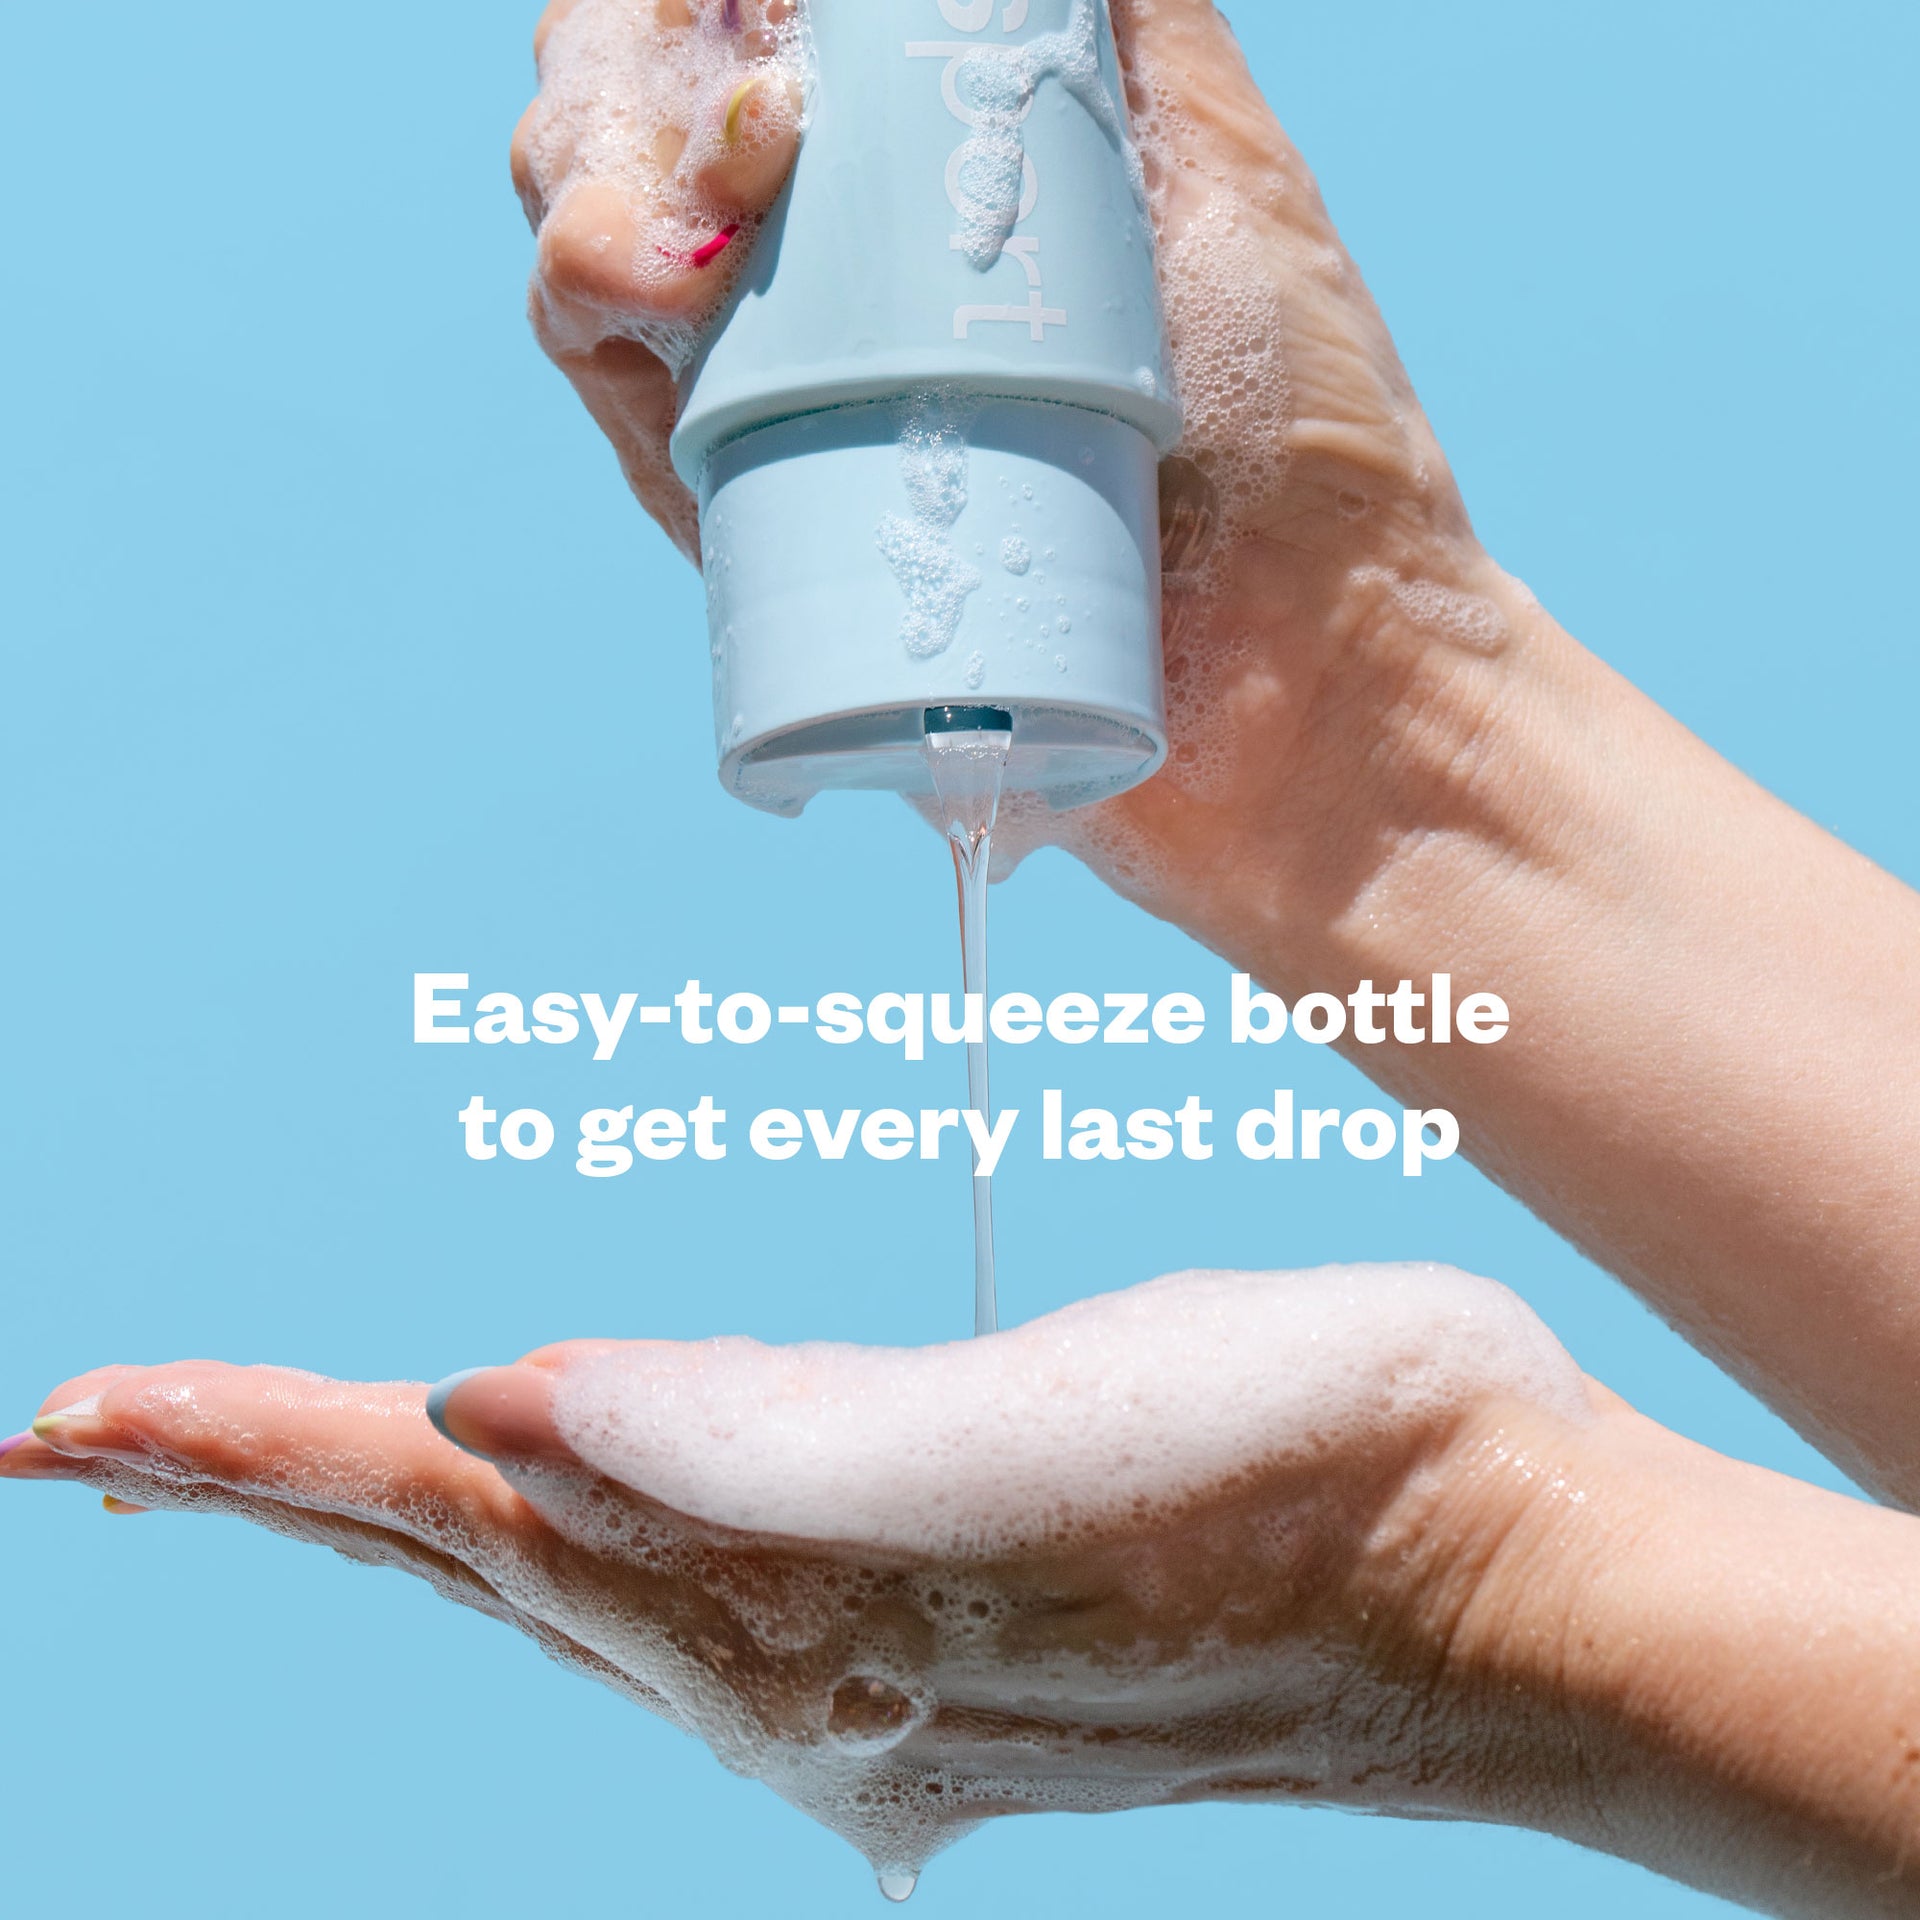 Easy-to-squeeze bottle of Beachy Clean